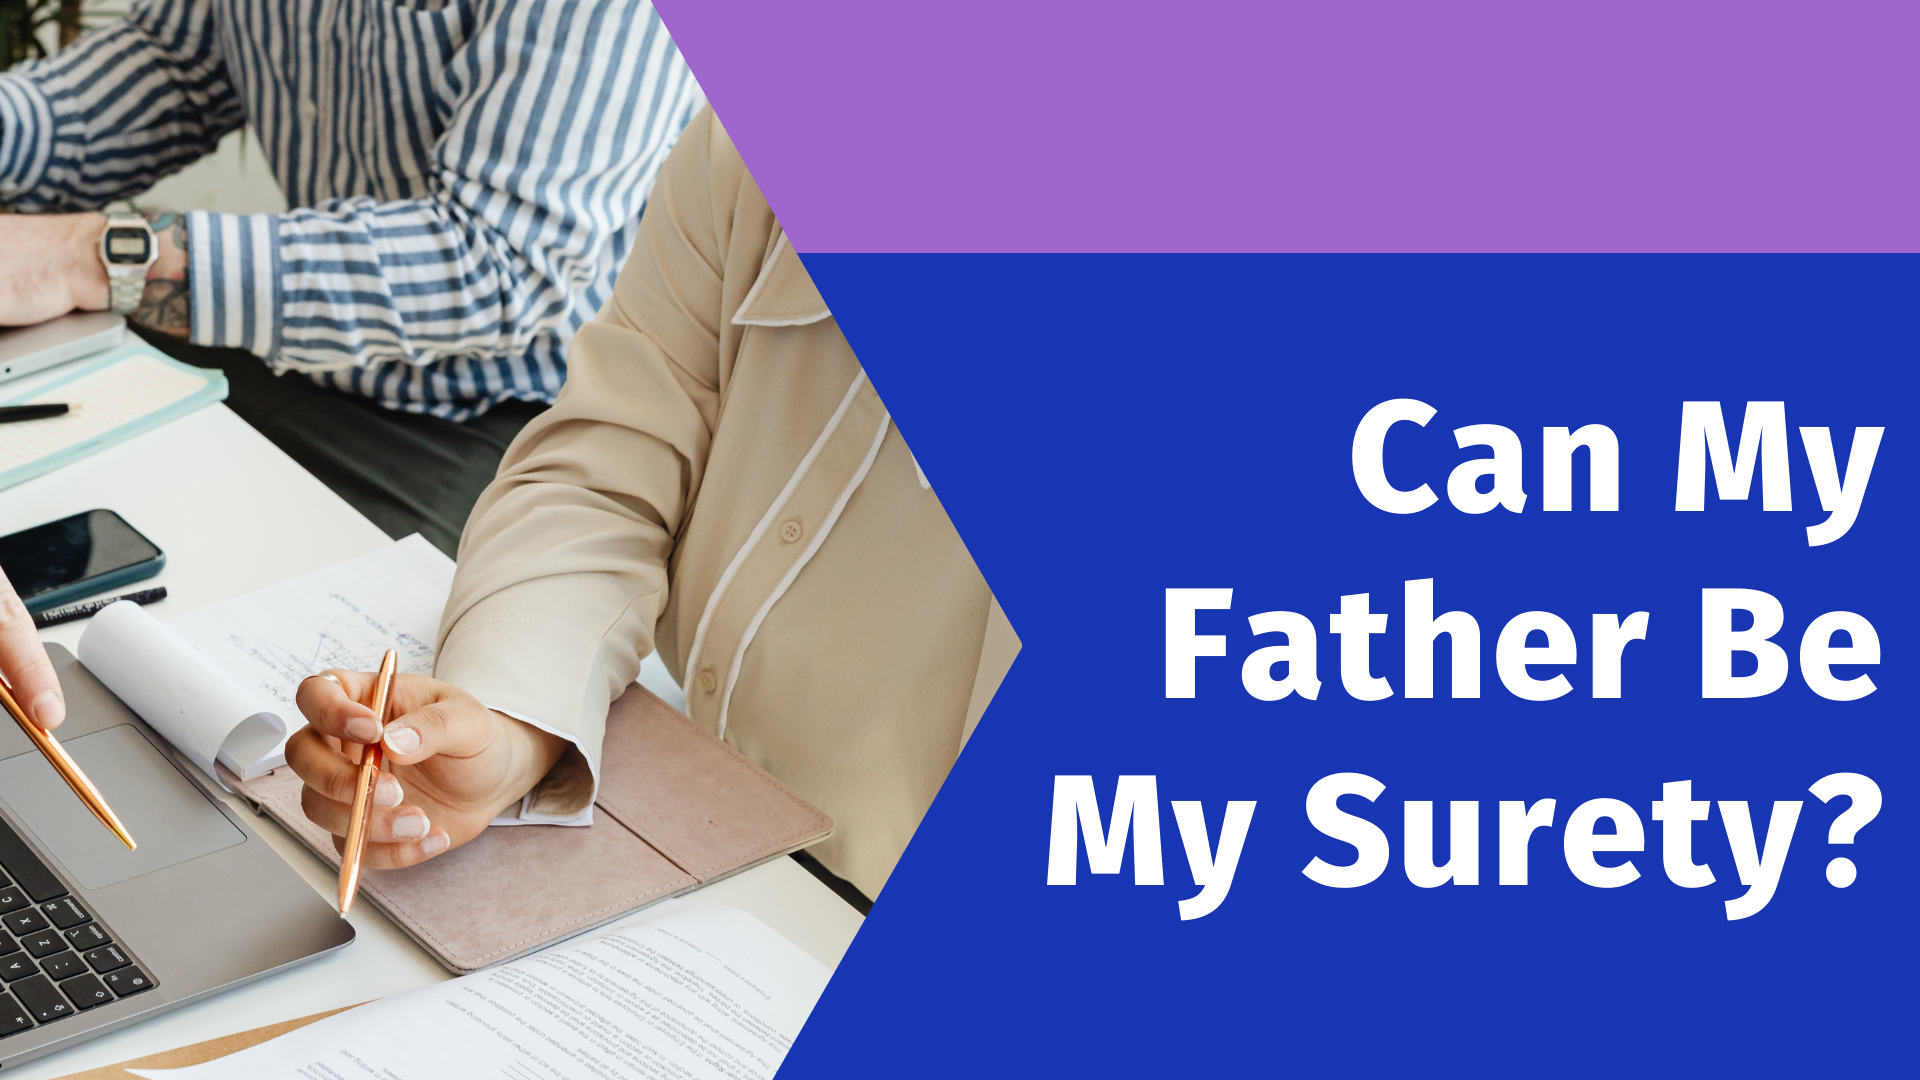 surety bond - Can my father be a surety - two individuals having transactions